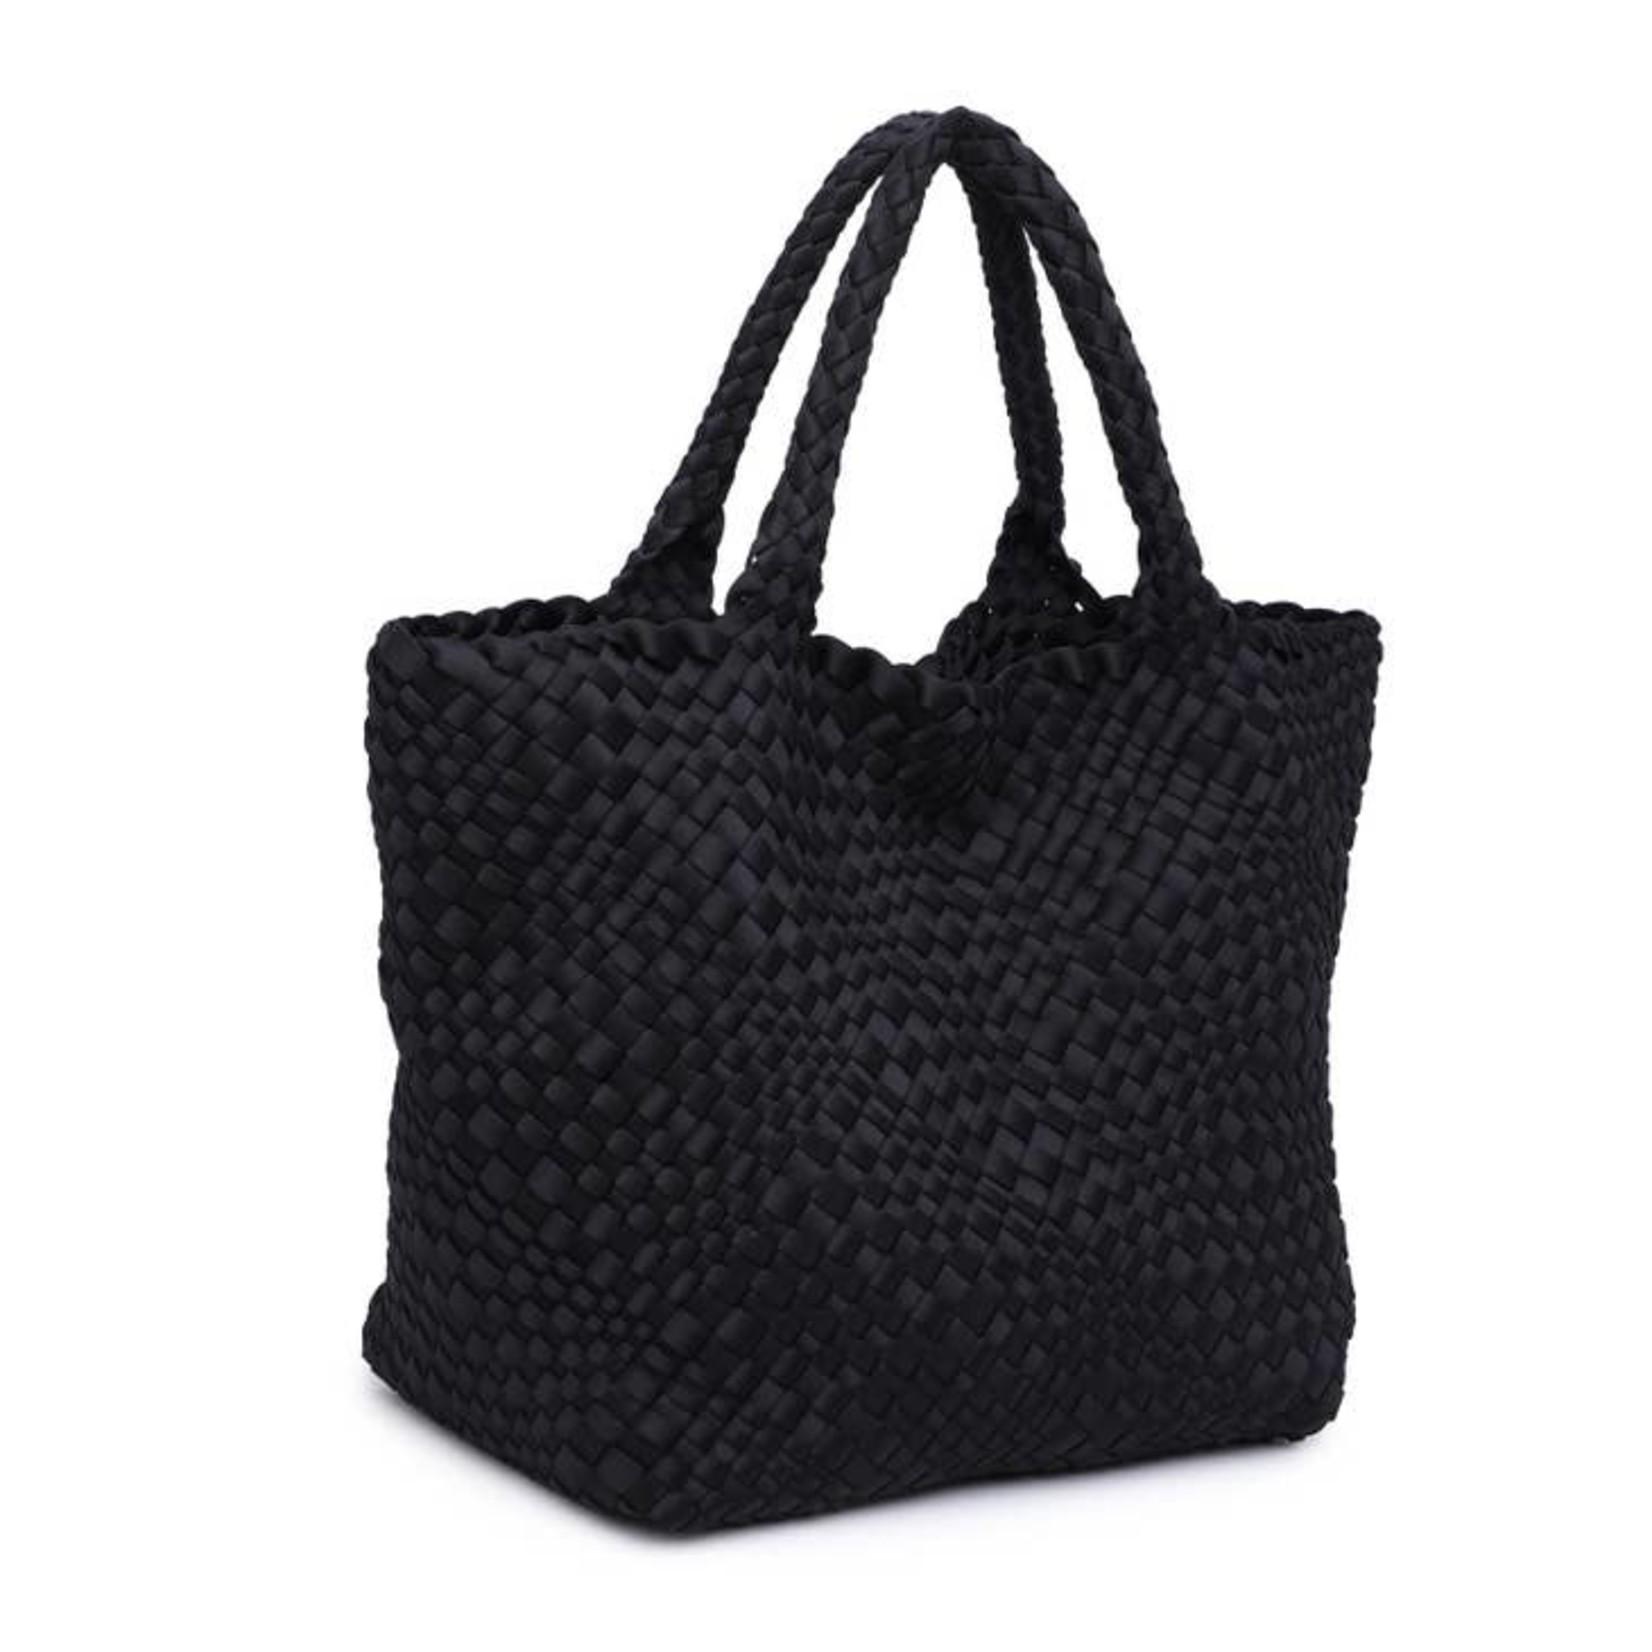 Urban Expressions Azadi Neoprene Woven Tote by Urban Expressions